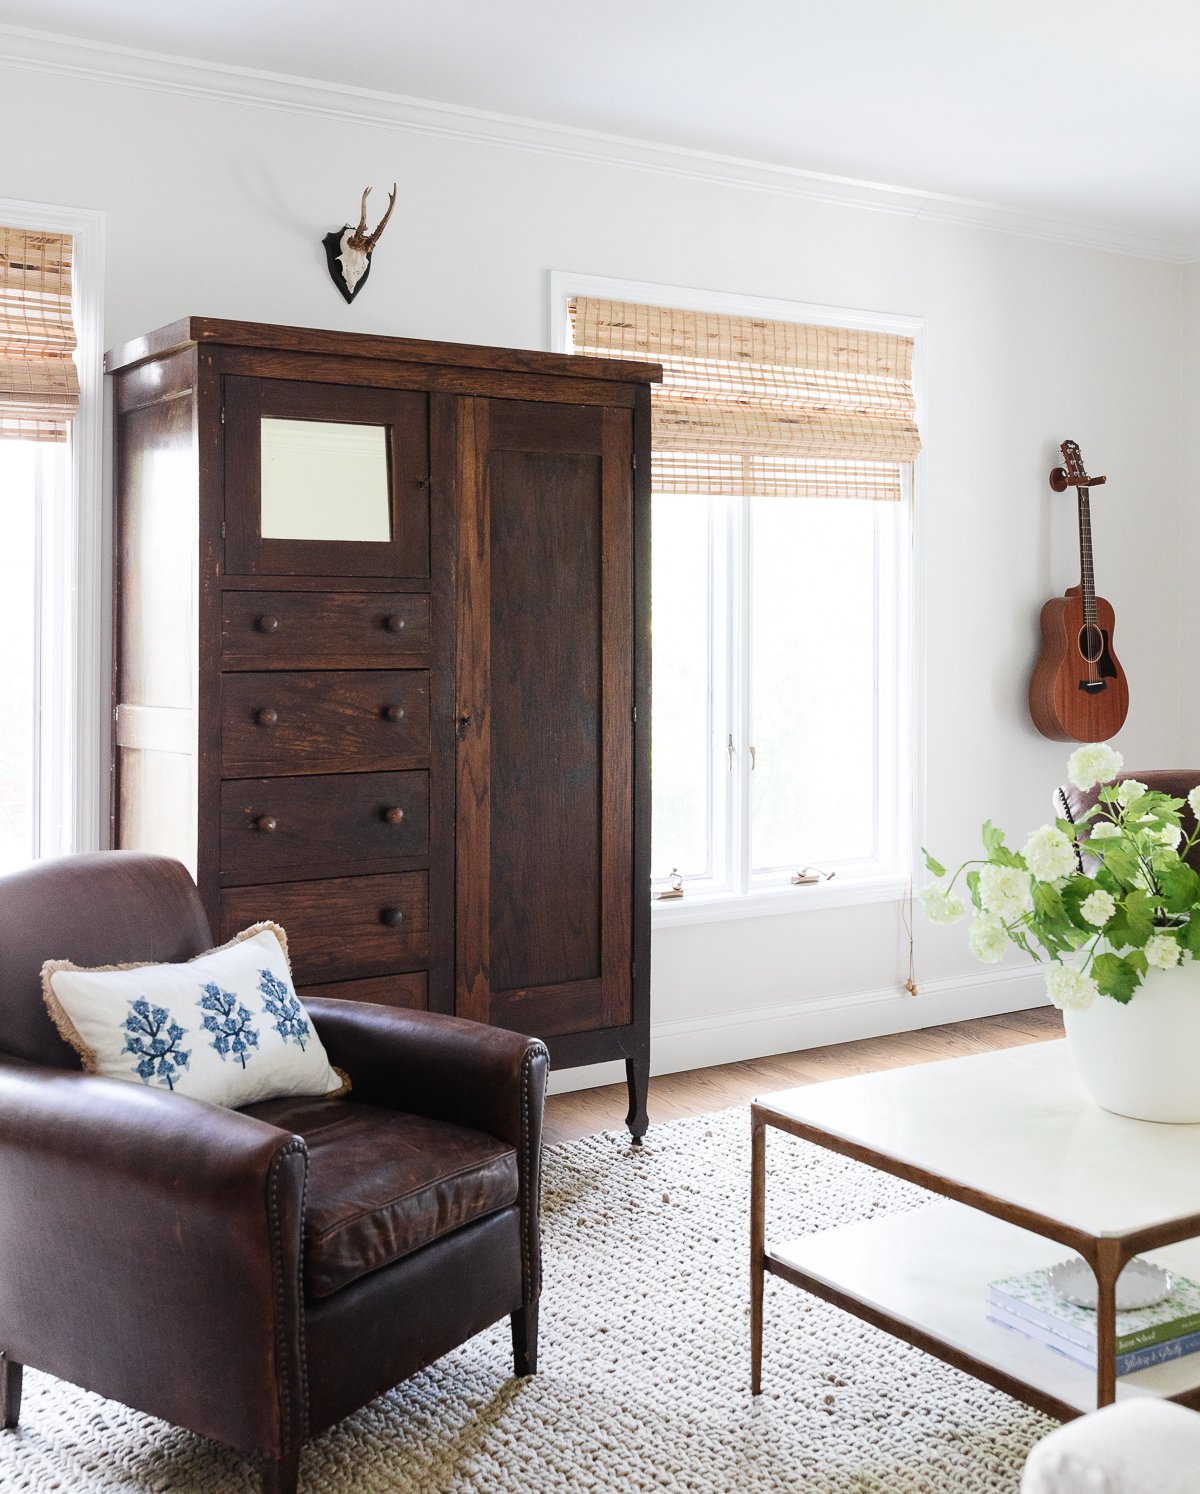 A family room with an antique armoire and bamboo blinds.